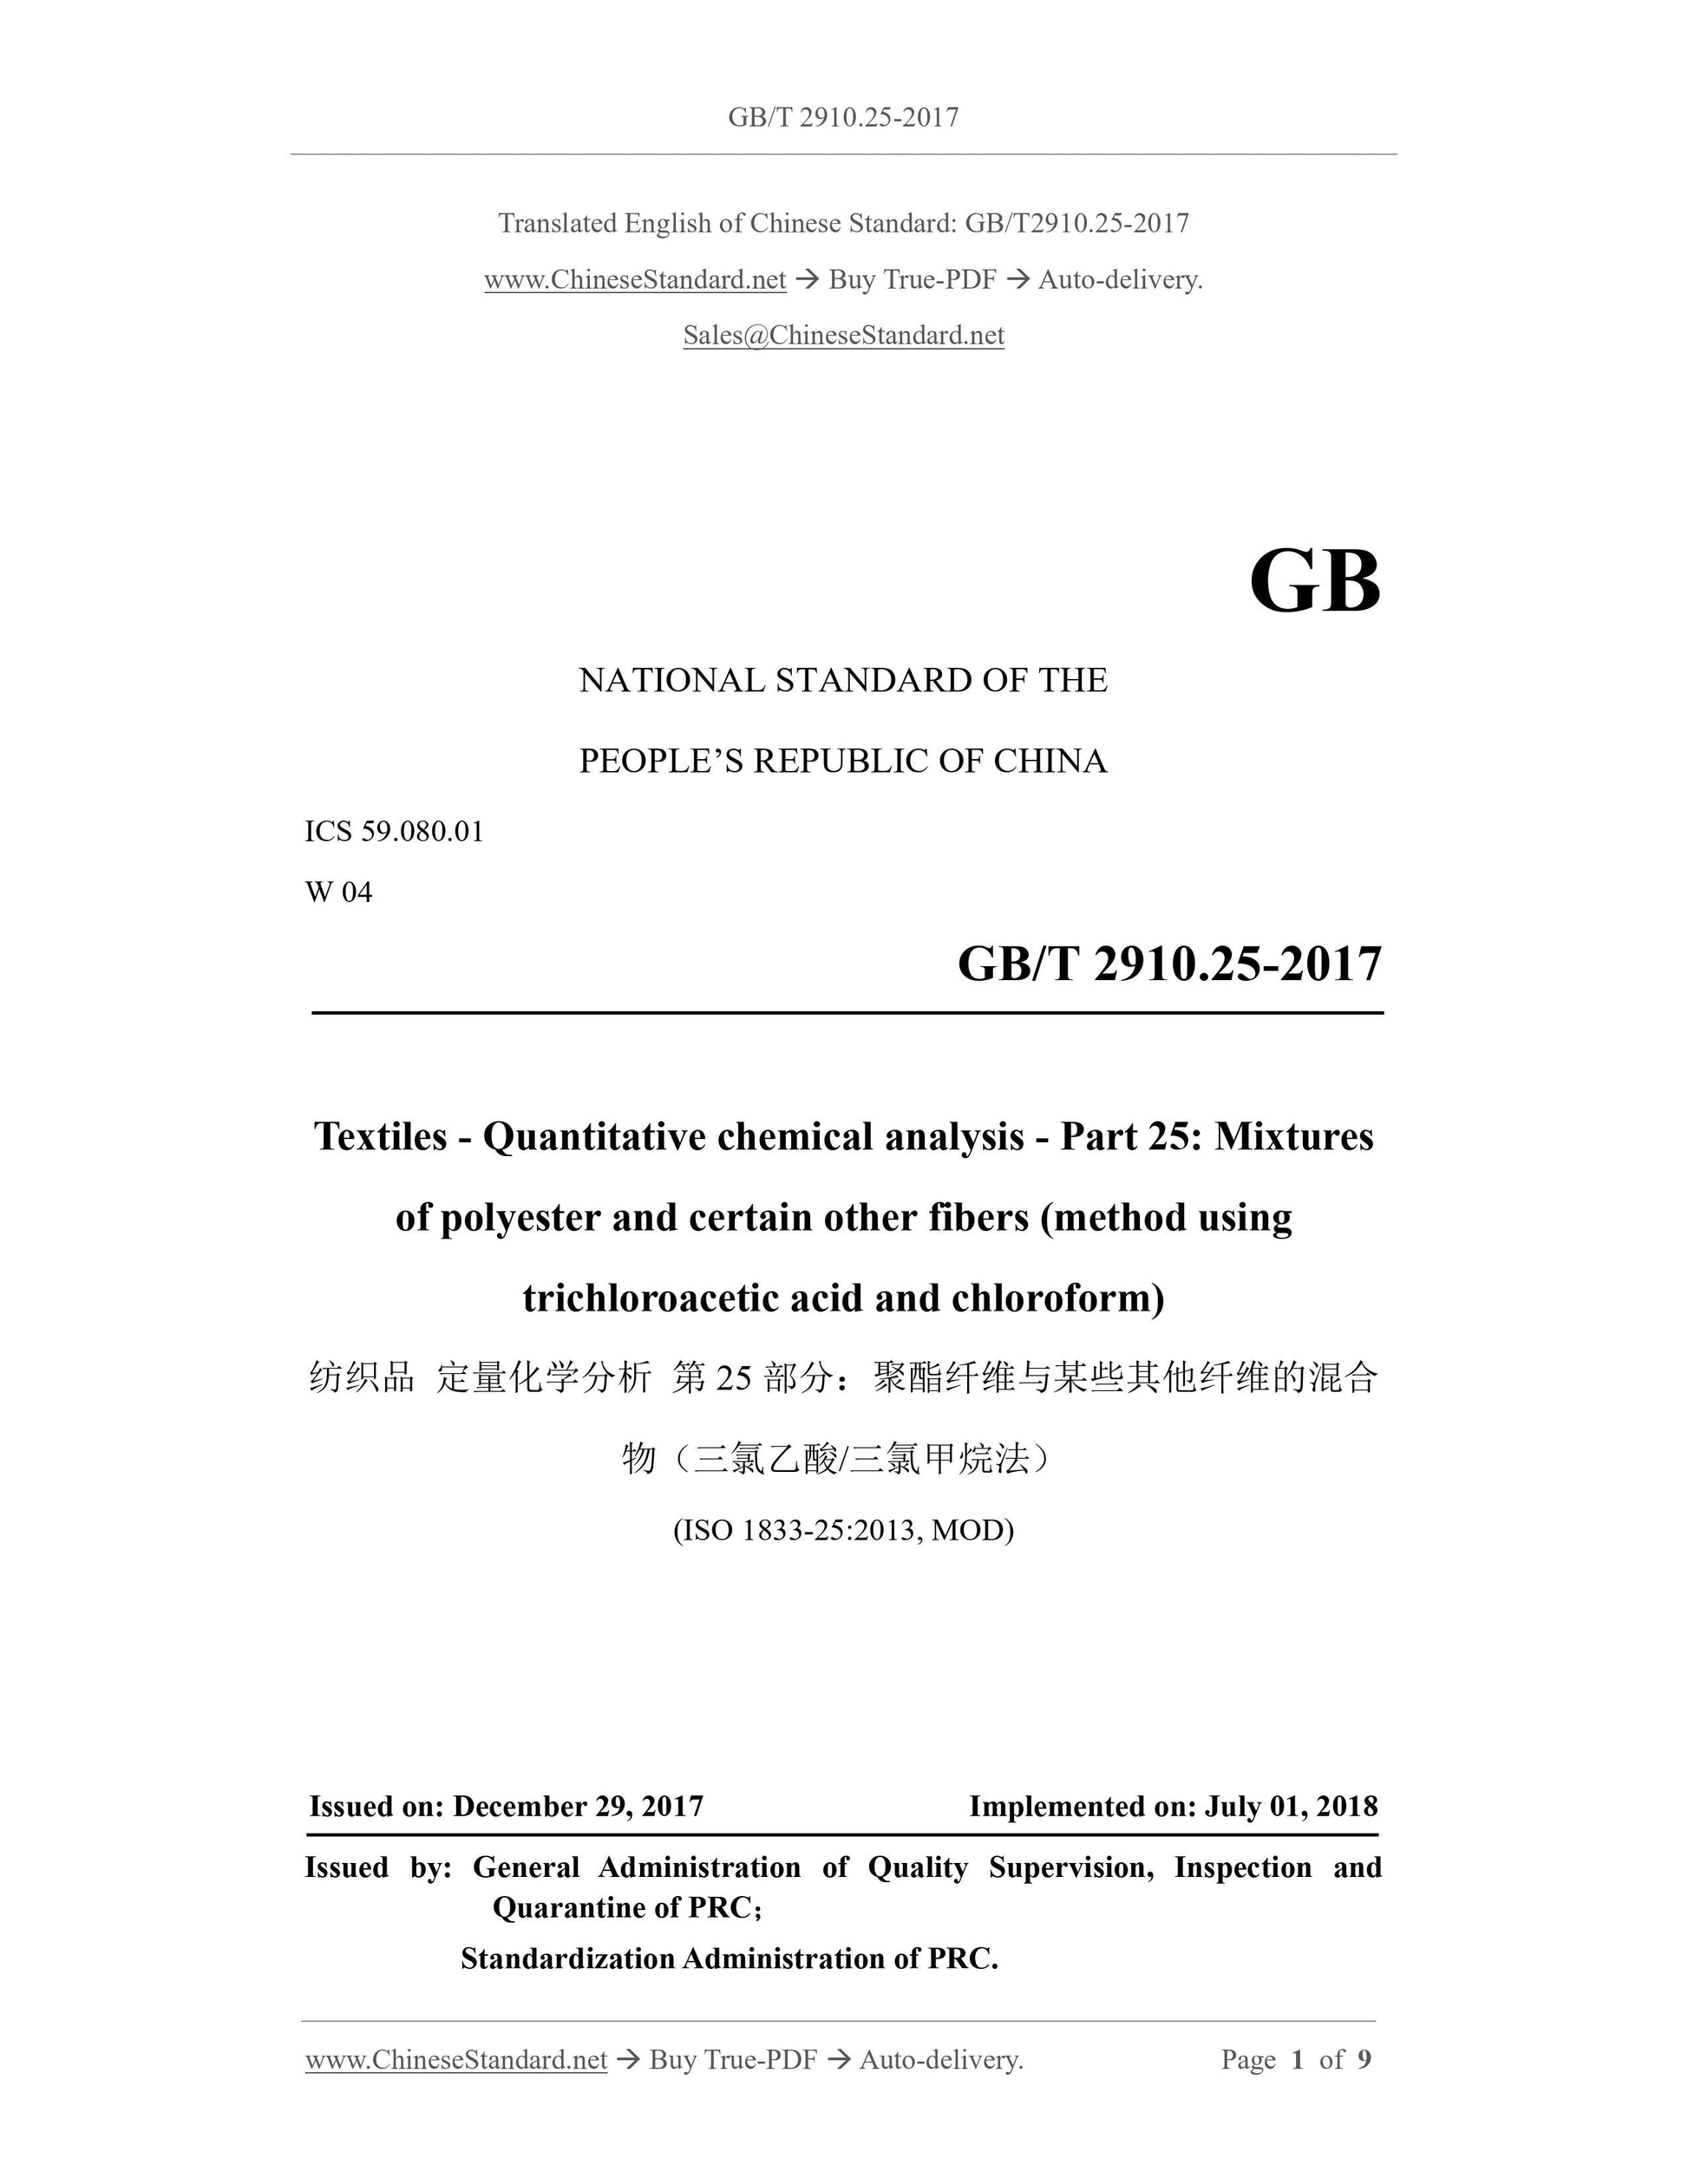 GB/T 2910.25-2017 Page 1